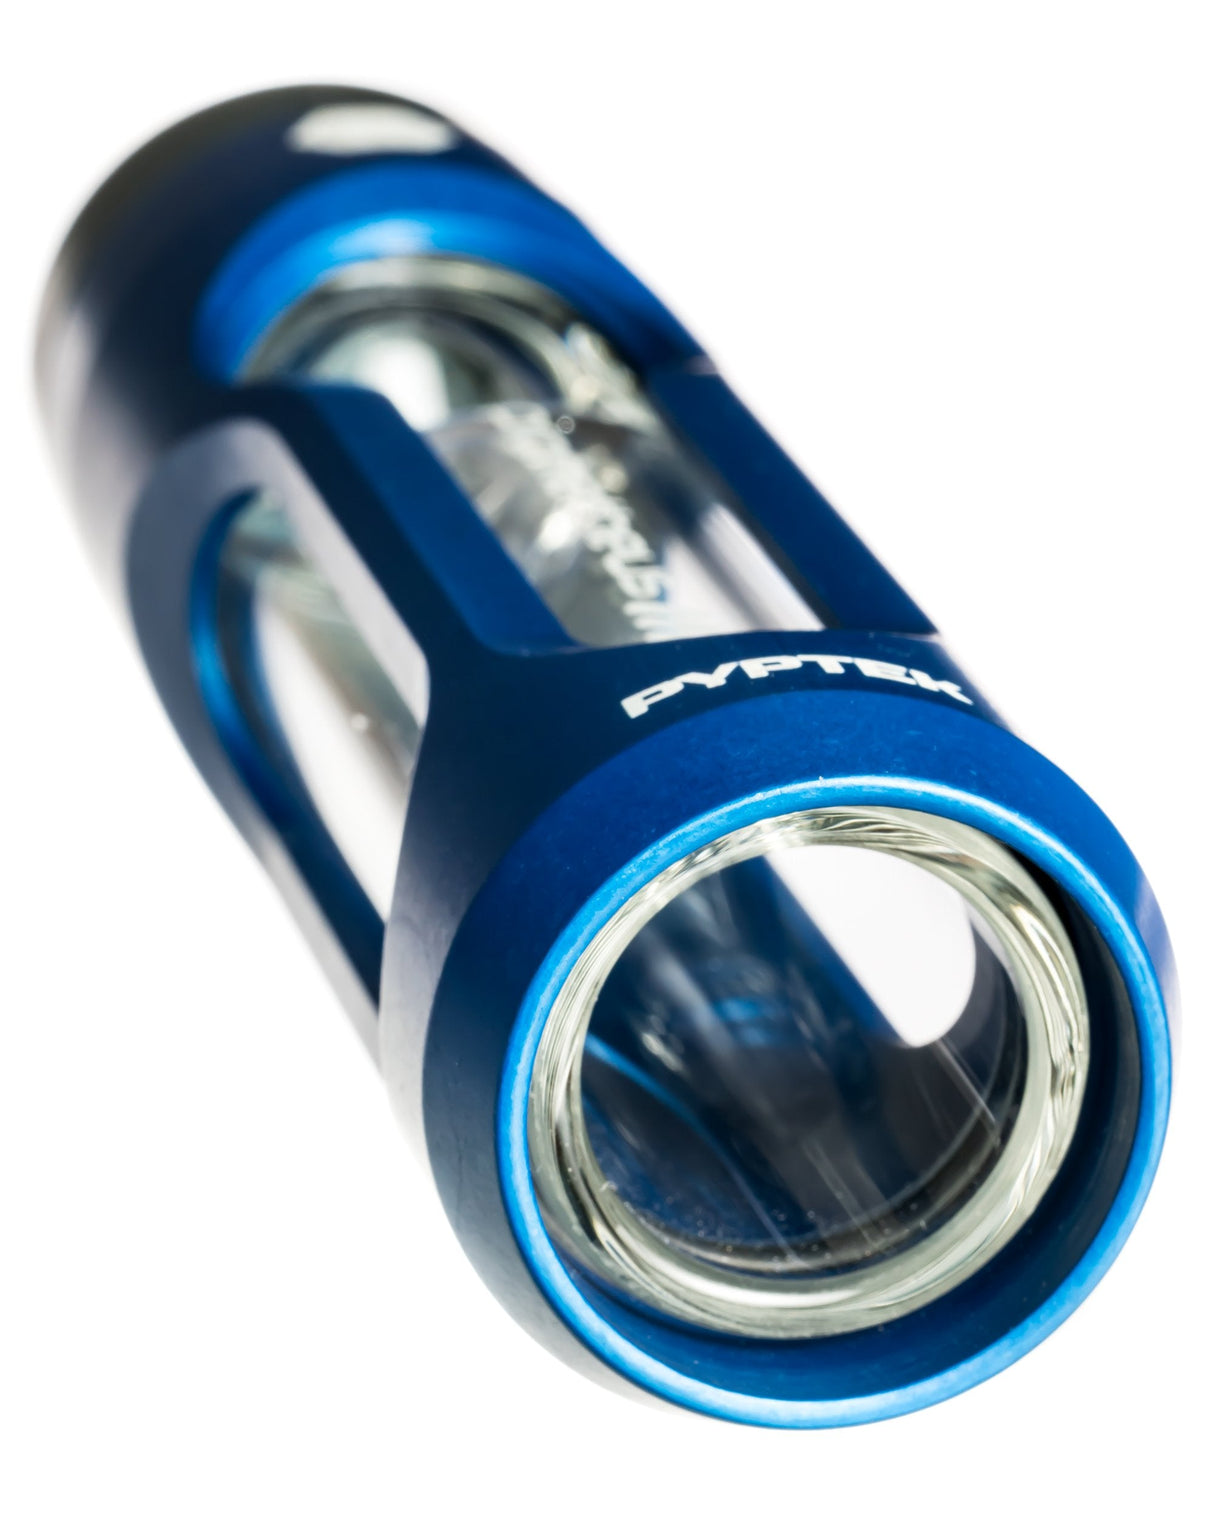 Pyptek Prometheus Dreamroller Pipe in blue, compact and portable design, side angle view